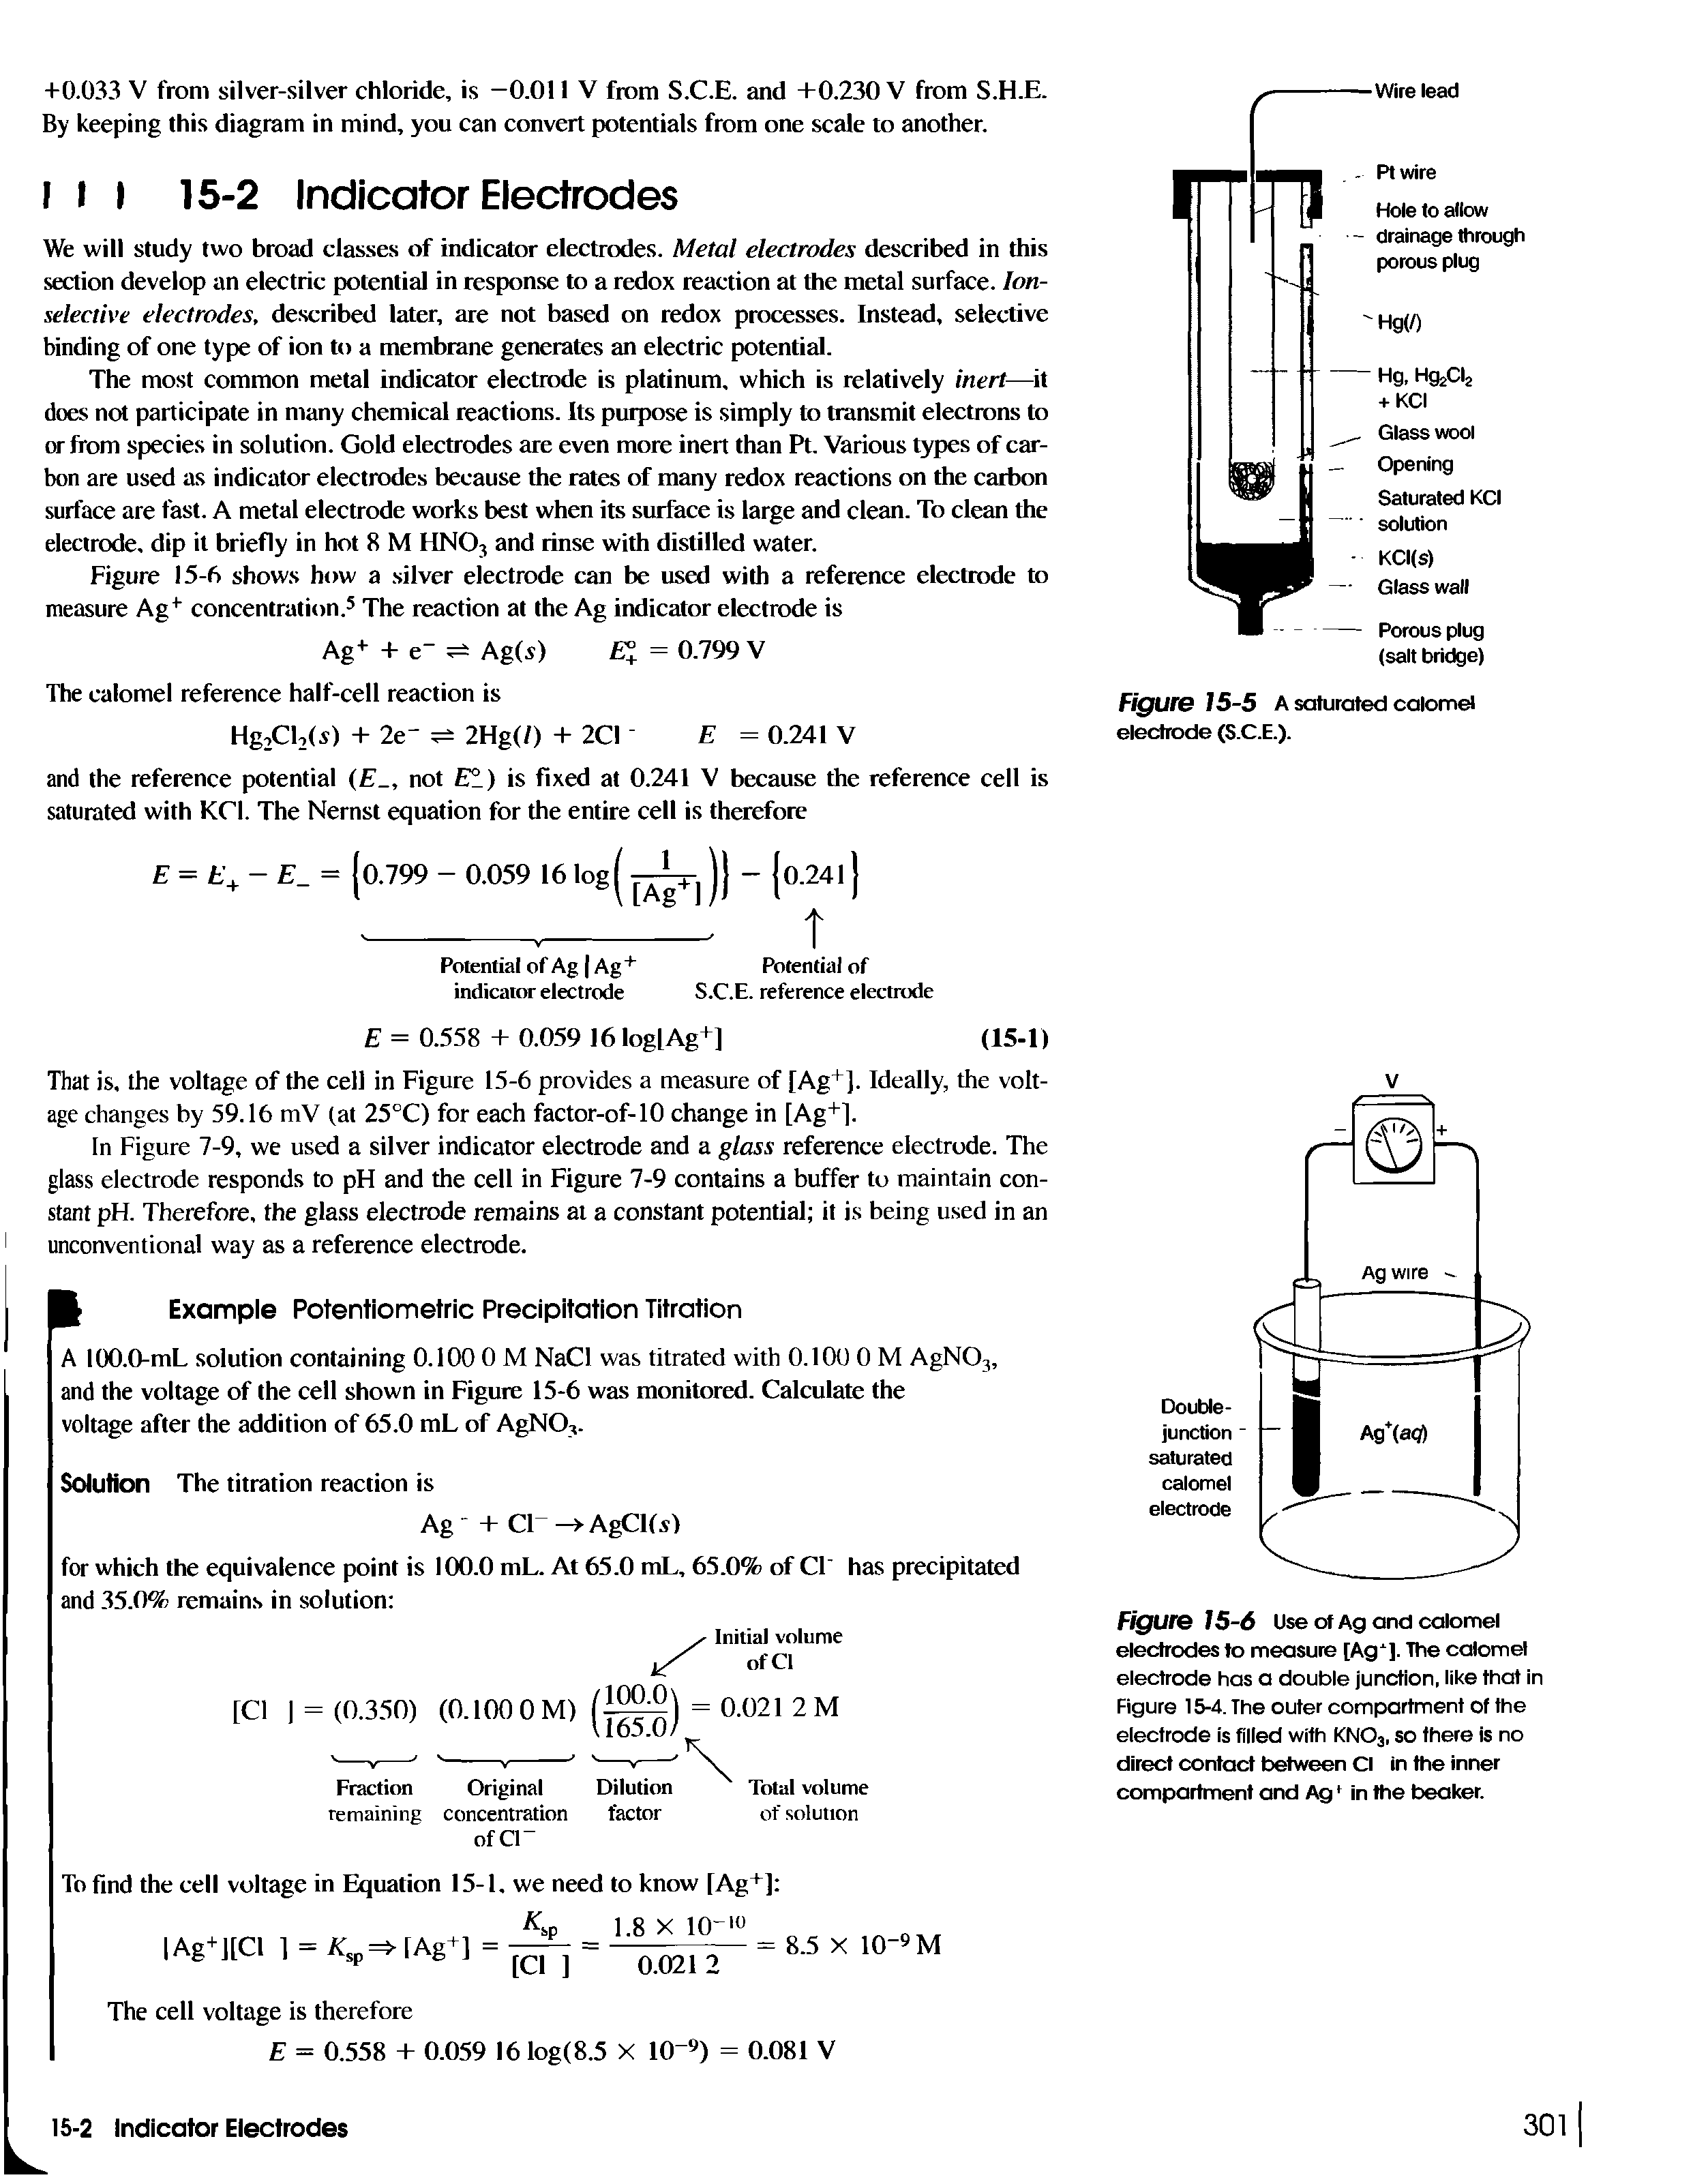 Figure 15-6 Use of Ag and calomel electrodes to measure [Ag ]. The calomel electrode has a double junction, like that in Figure 15-4. The outer compartment of the electrode is filled with KN03, so there is no direct contact between Cl in the inner compartment and Ag1 in the beaker.